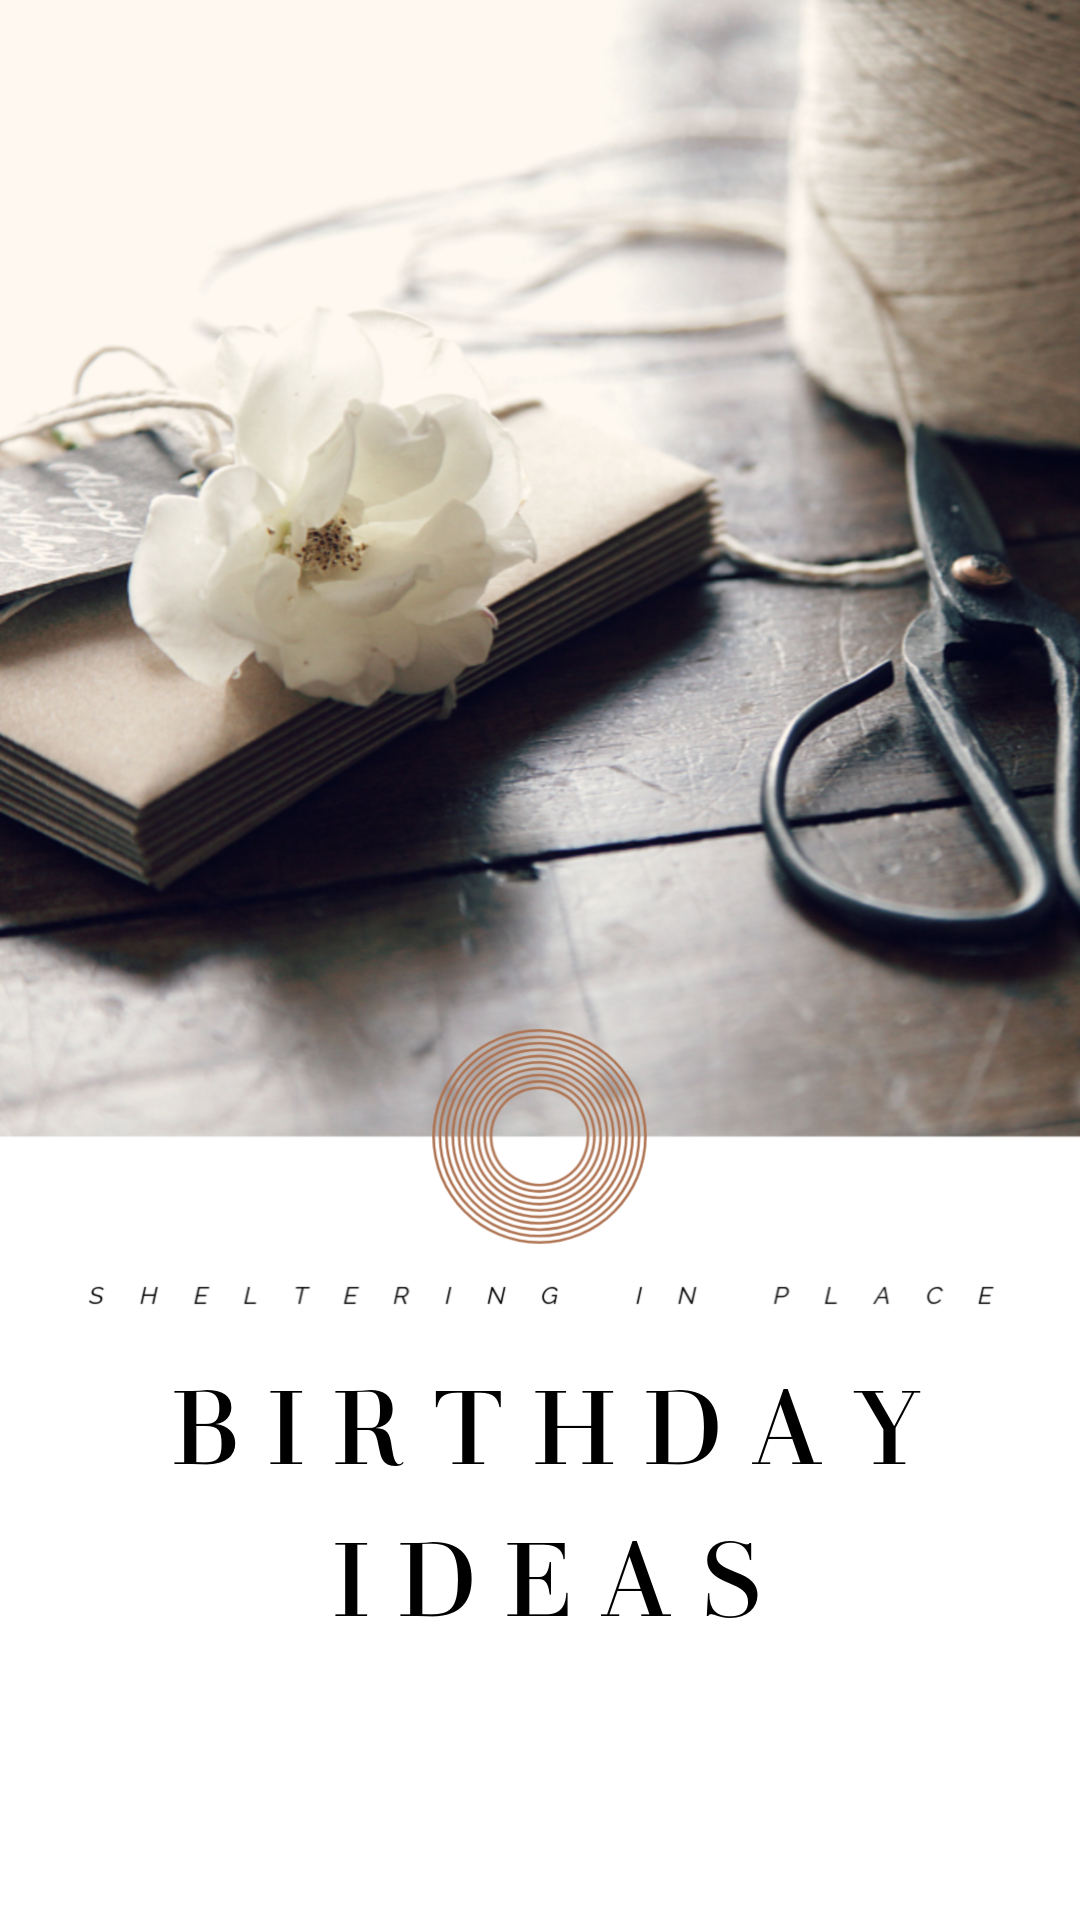 How To Make Birthdays Special For Children During Sheltering In Place